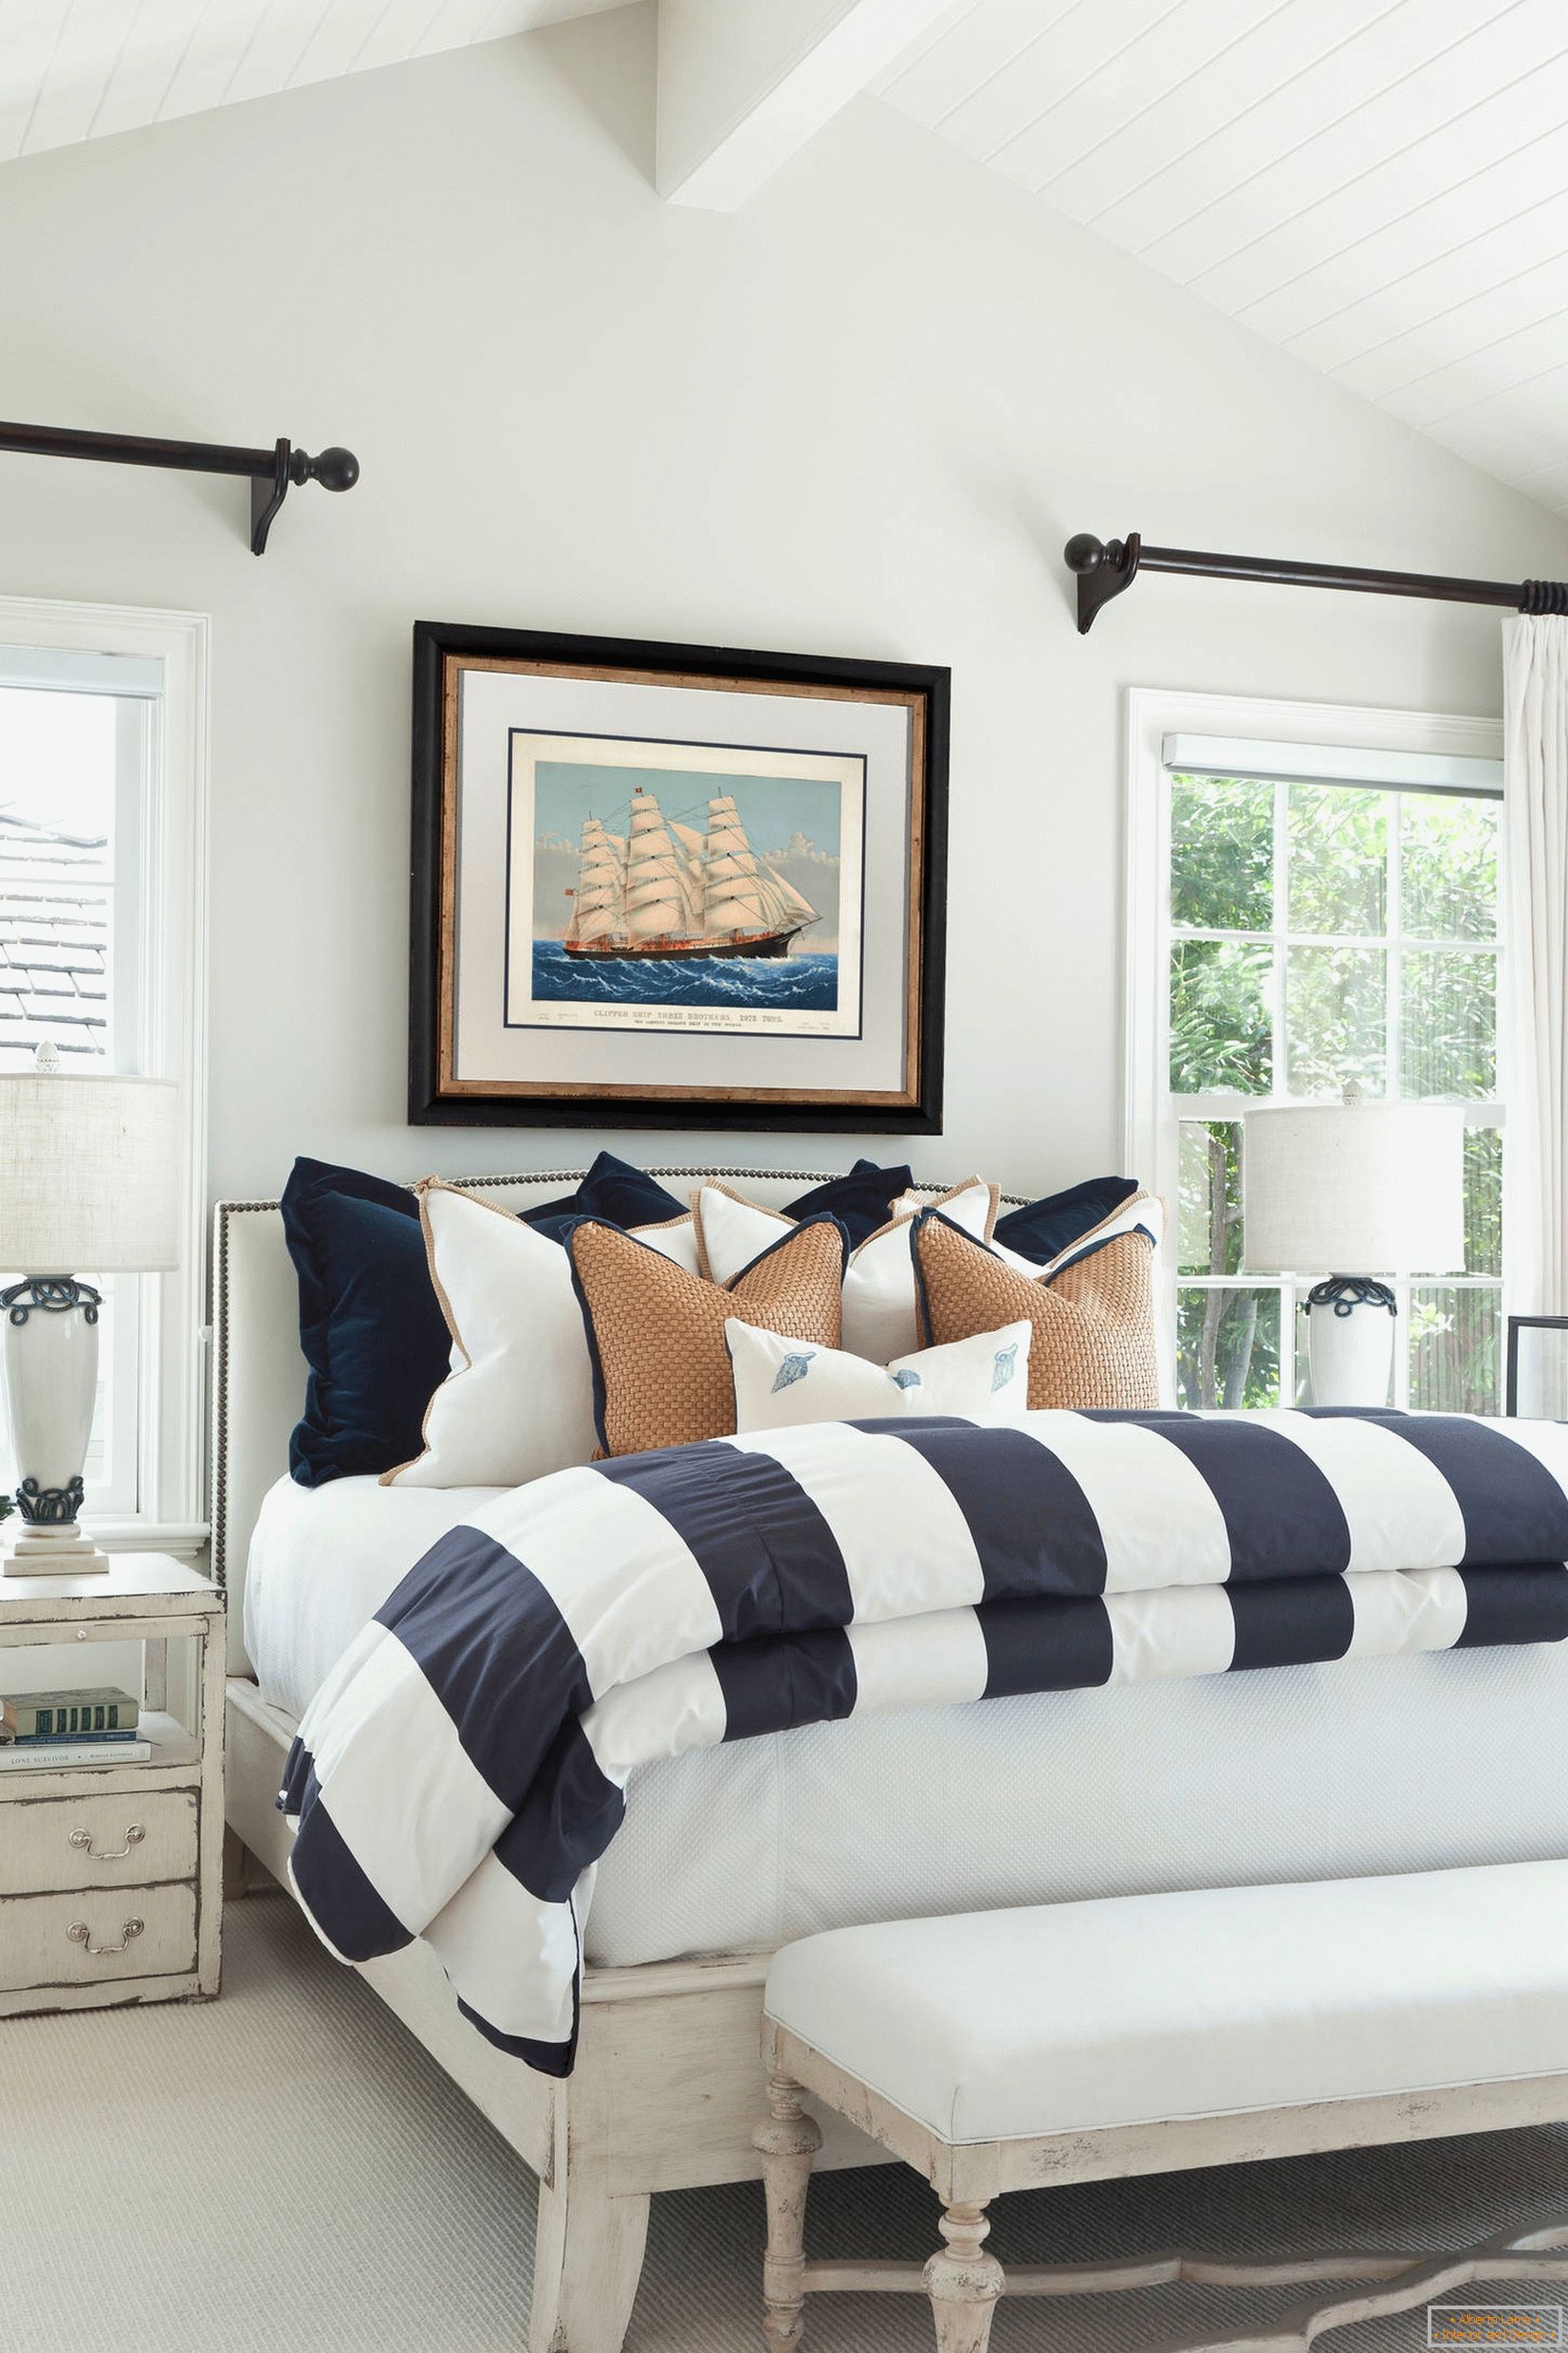 Marine style in the interior of the bedroom